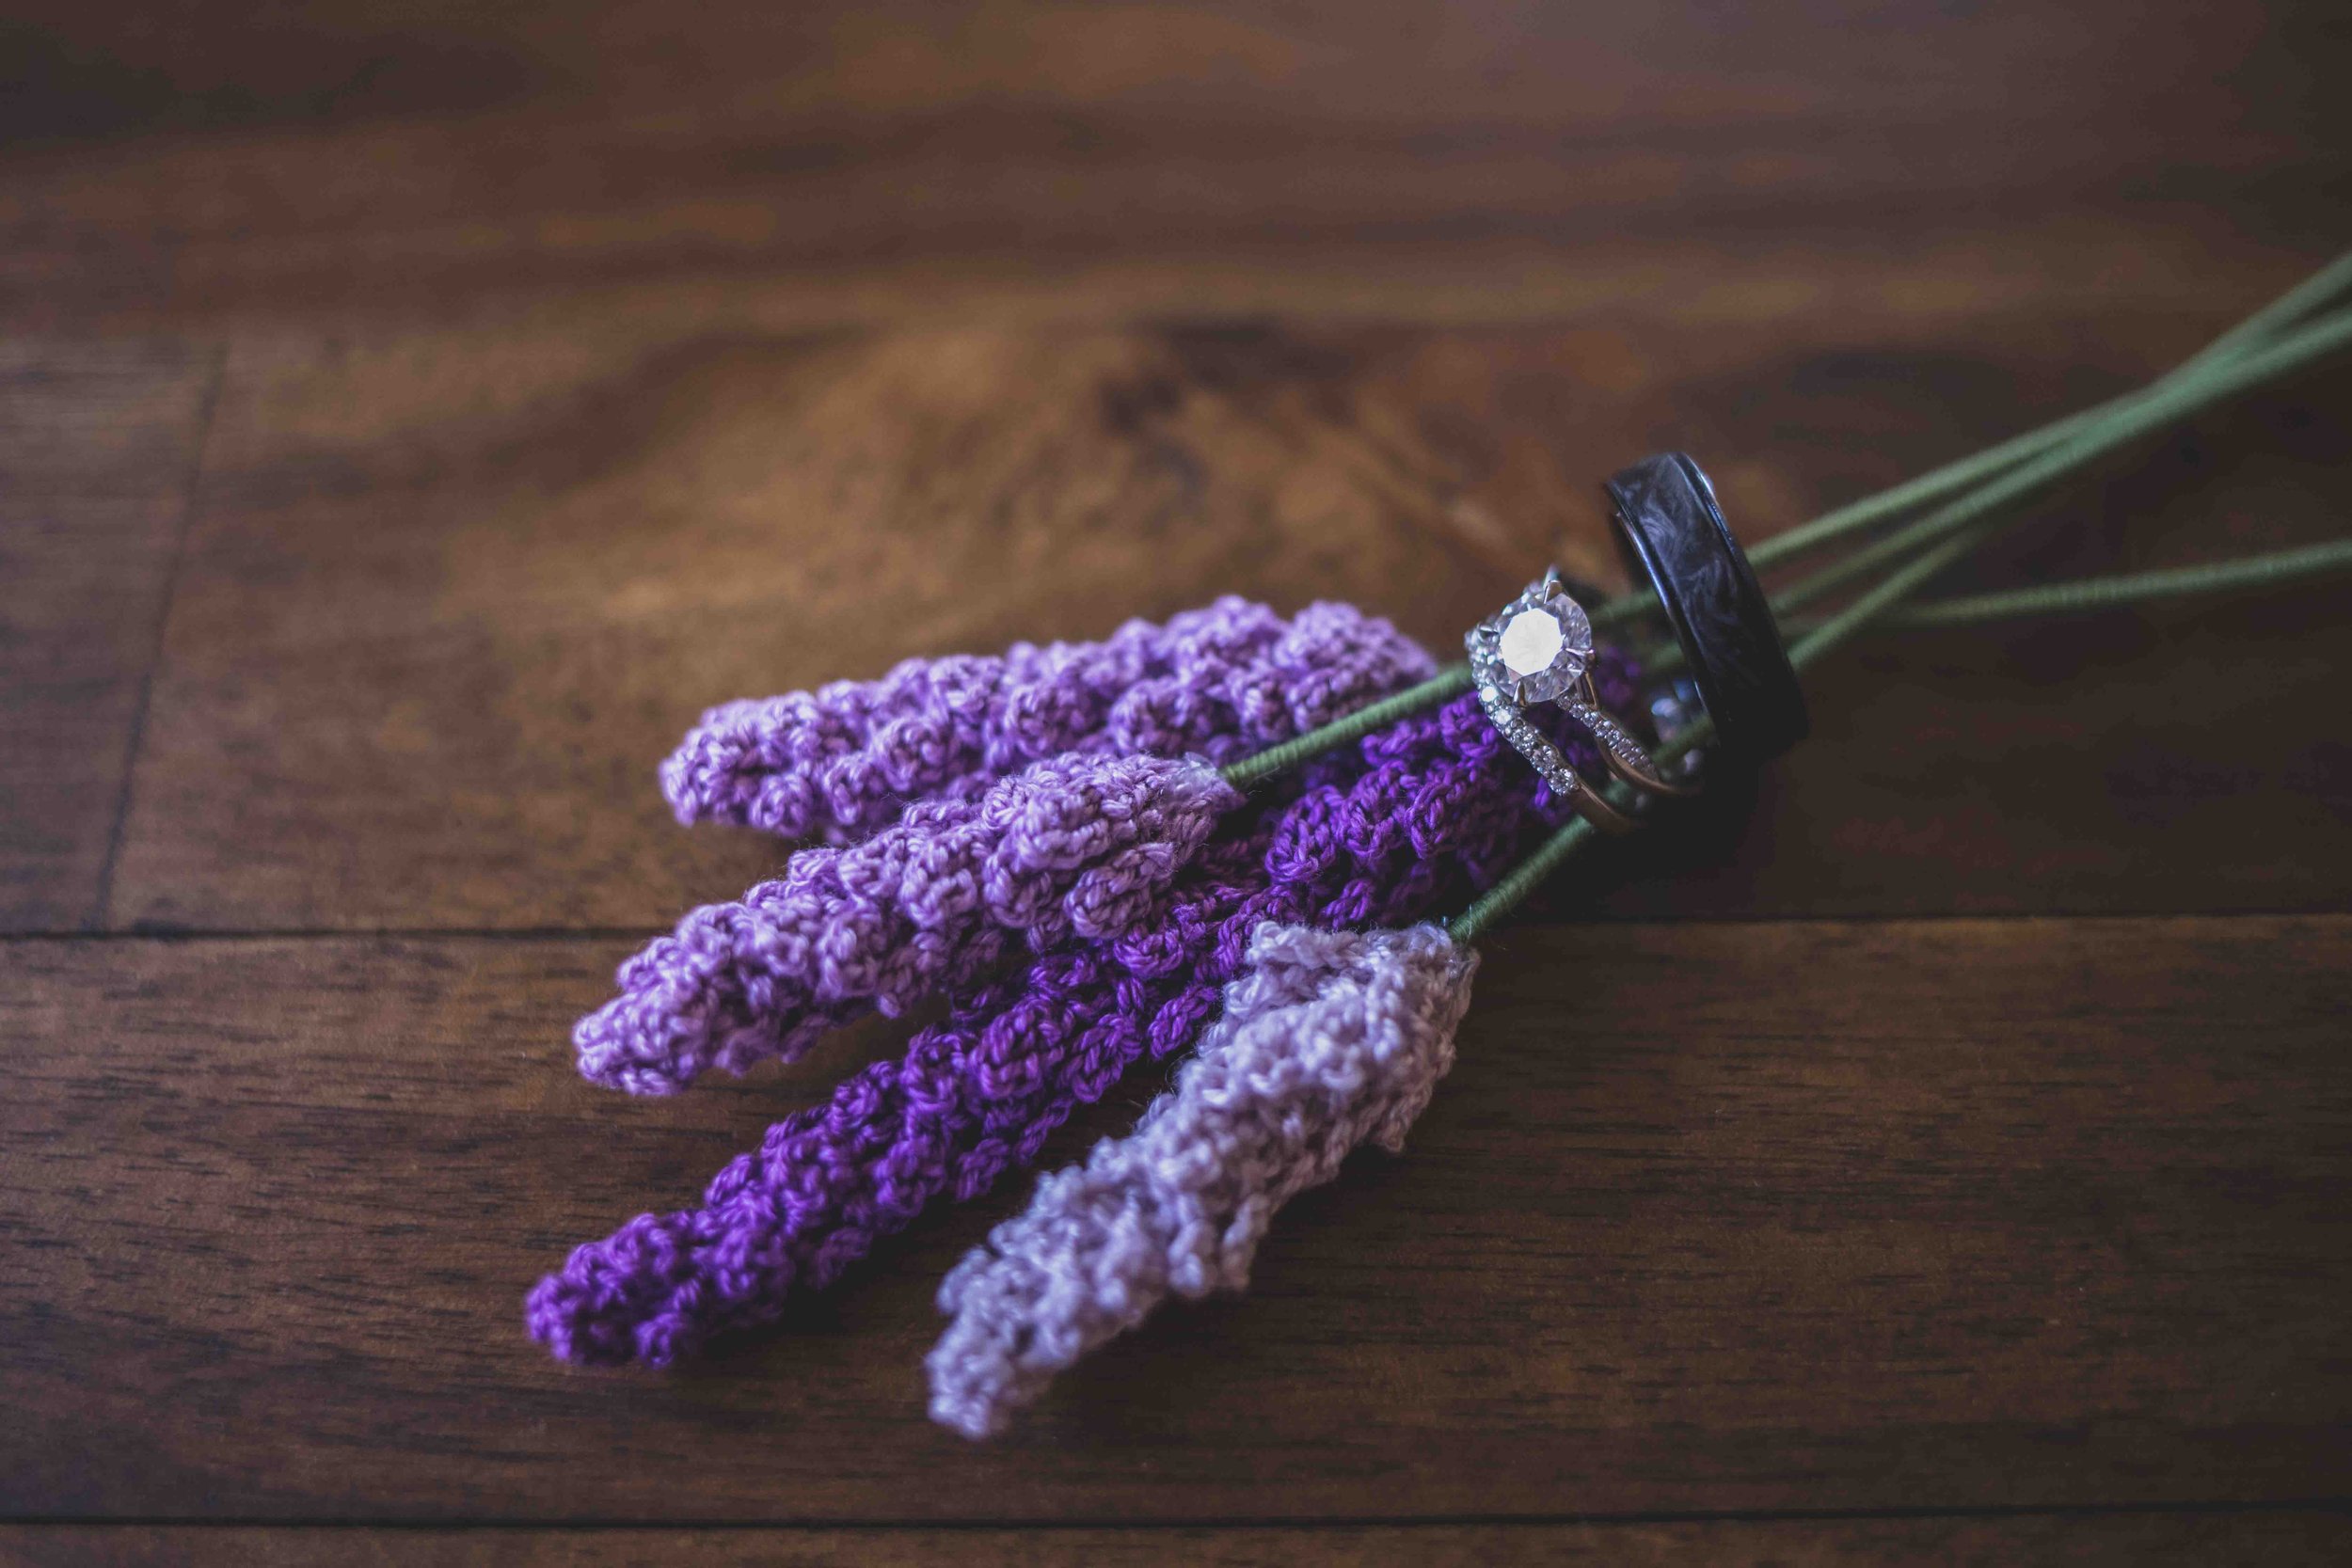  Detail of Wedding Rings and Lavender flowers crocheted by Bride by Gilbert Wedding Photographer Jennifer Lind Schutsky 